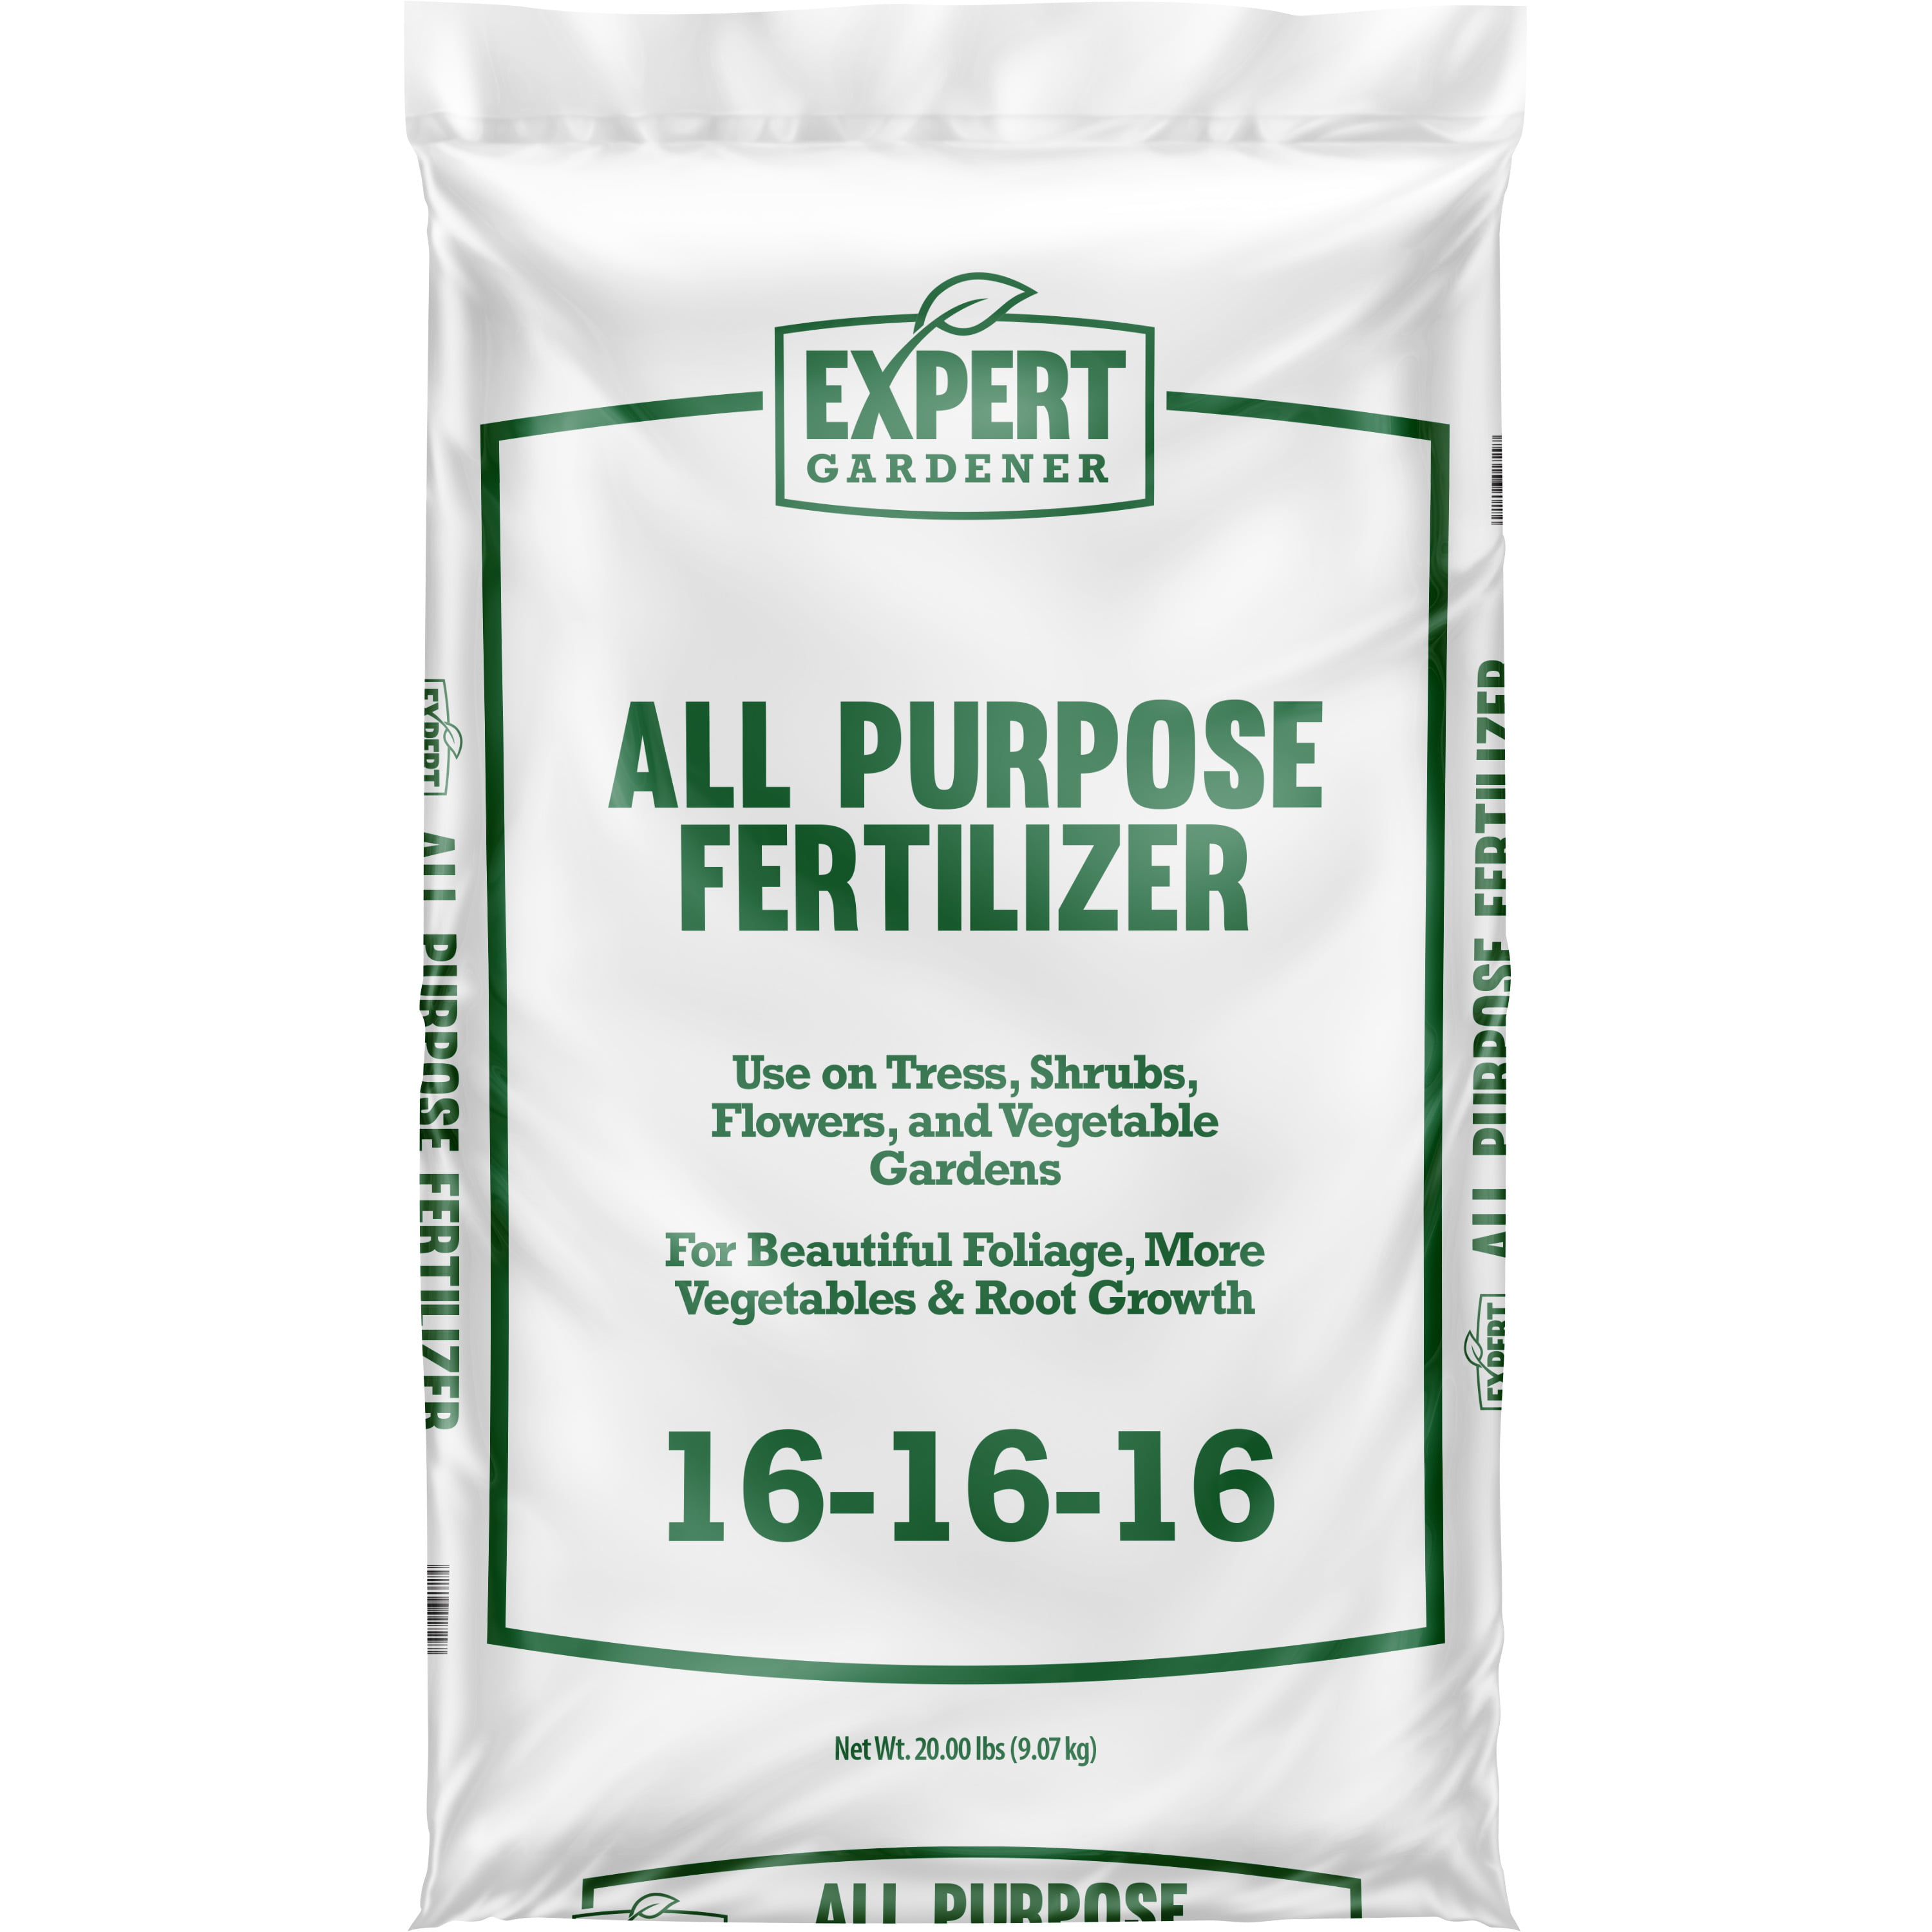 16-16-16 Fertilizer: Benefits and When & How To Use It